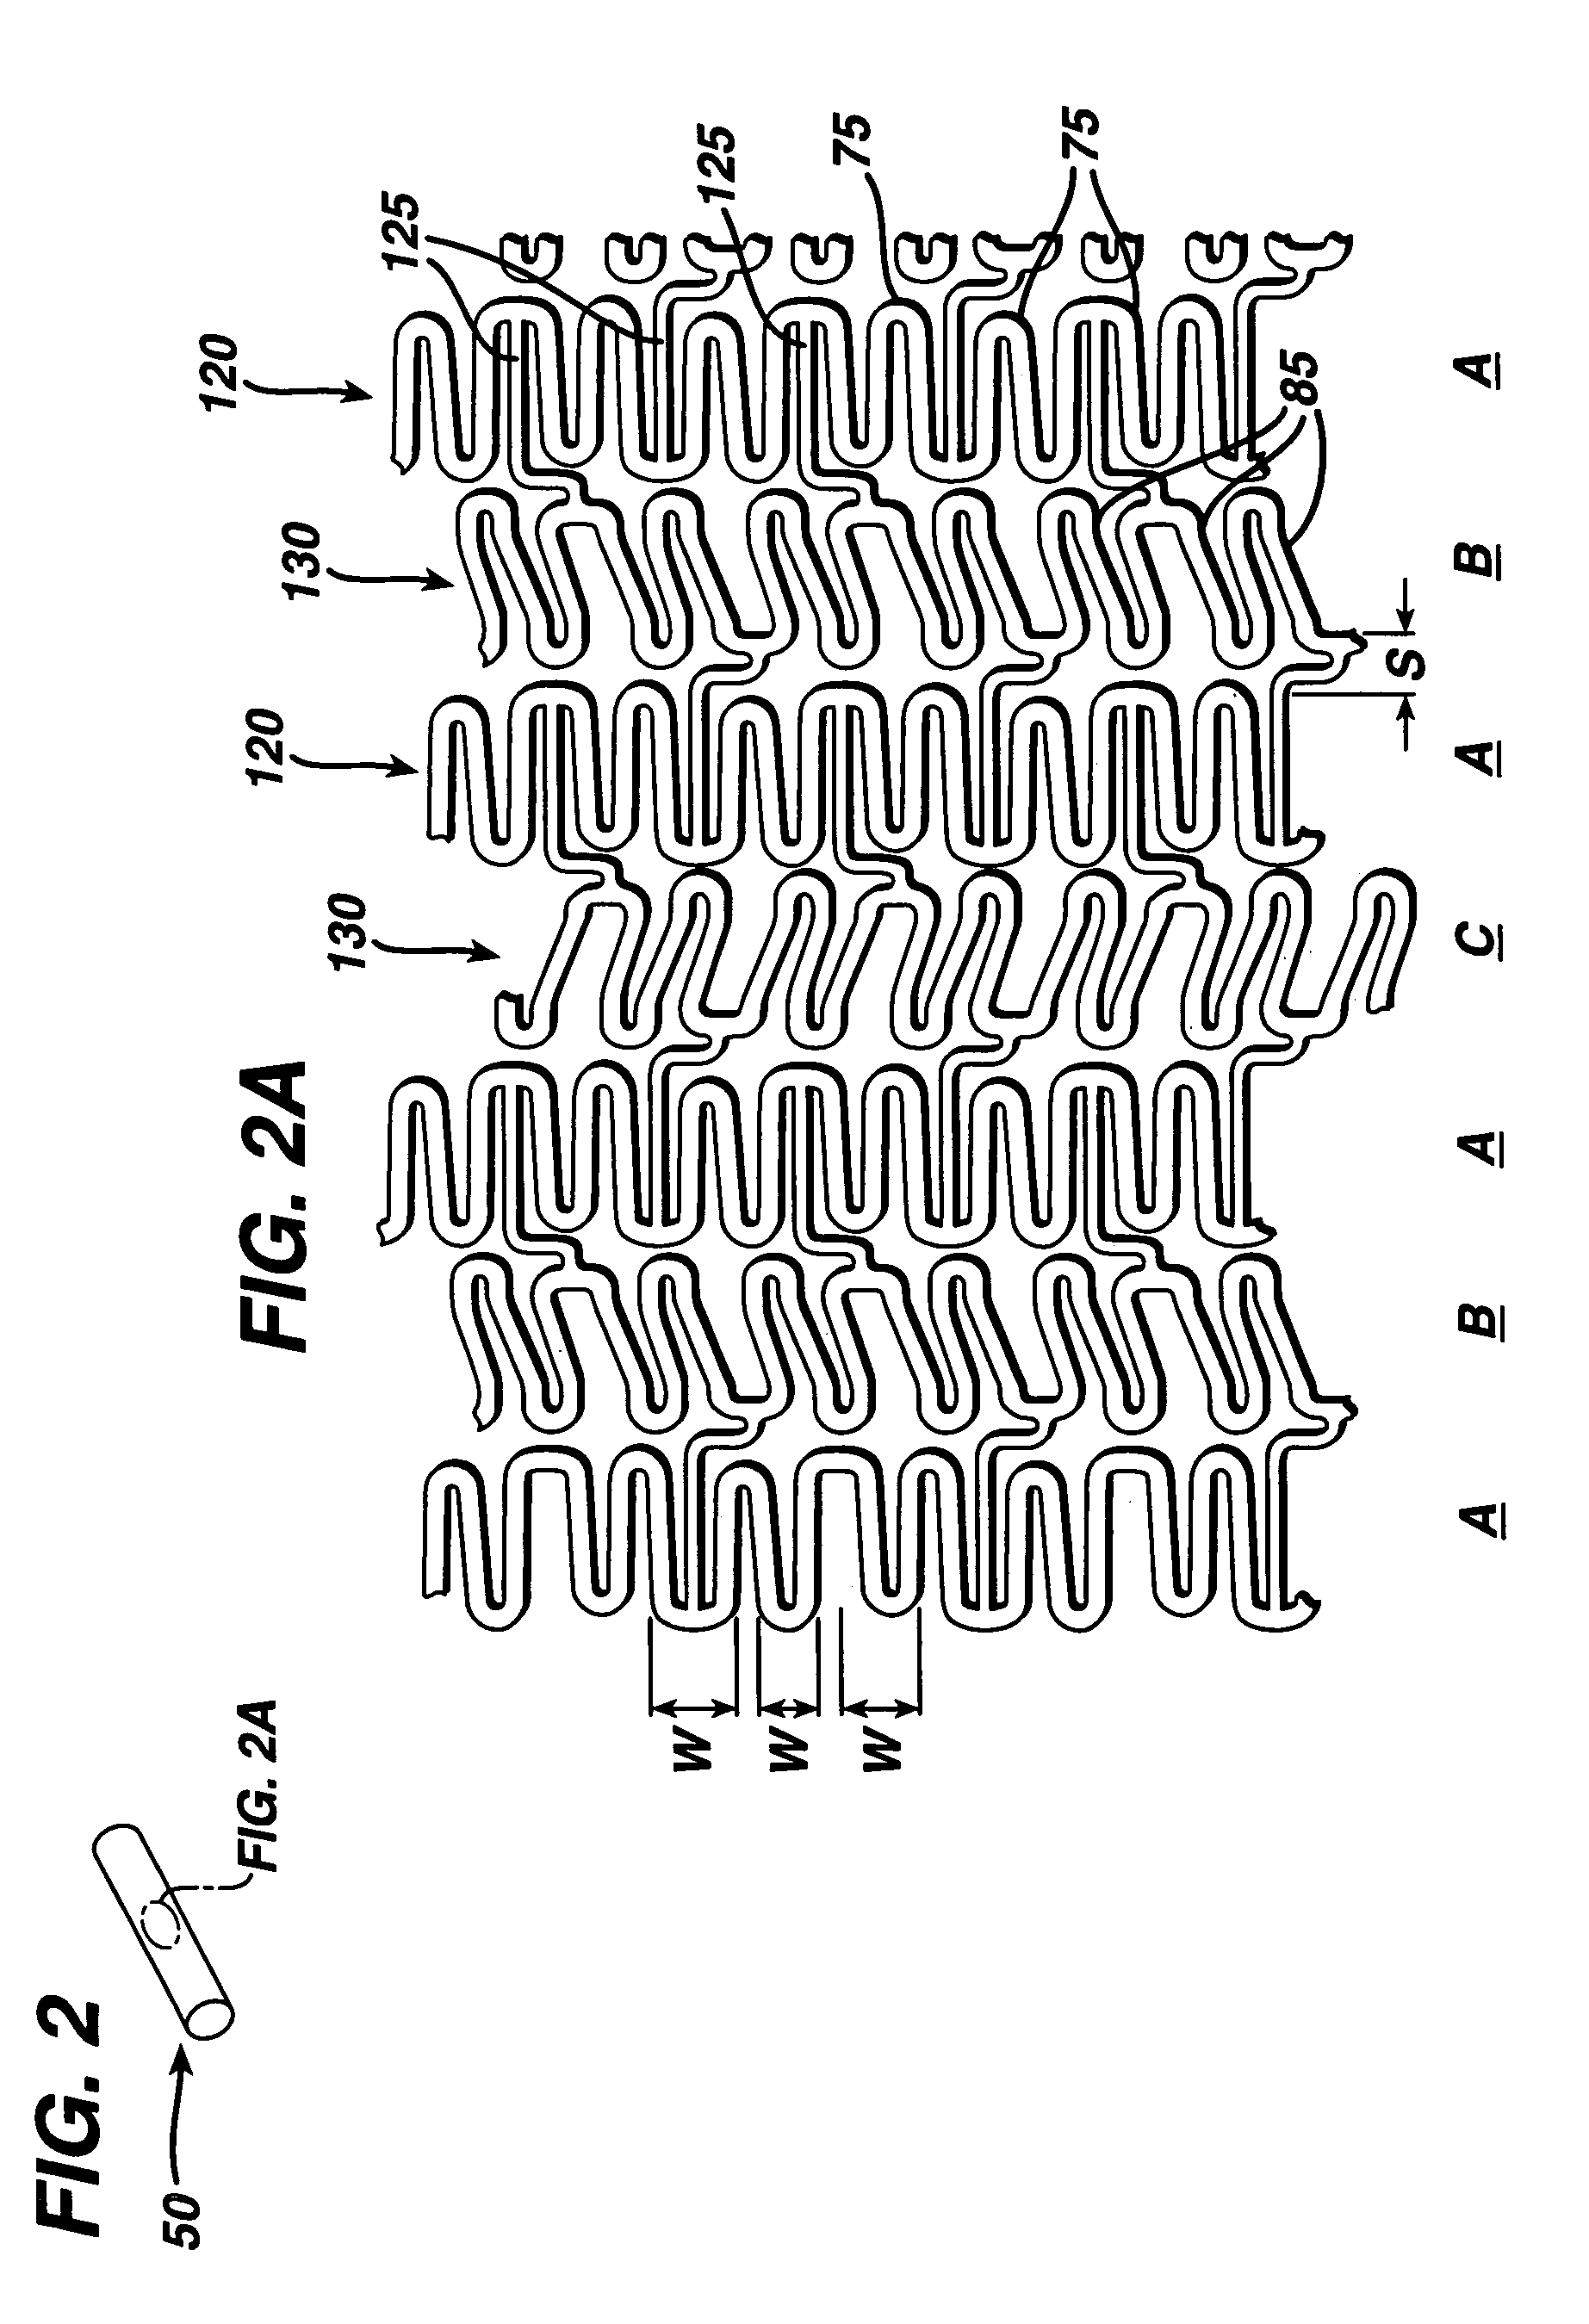 Flexible stent and method of manufacture